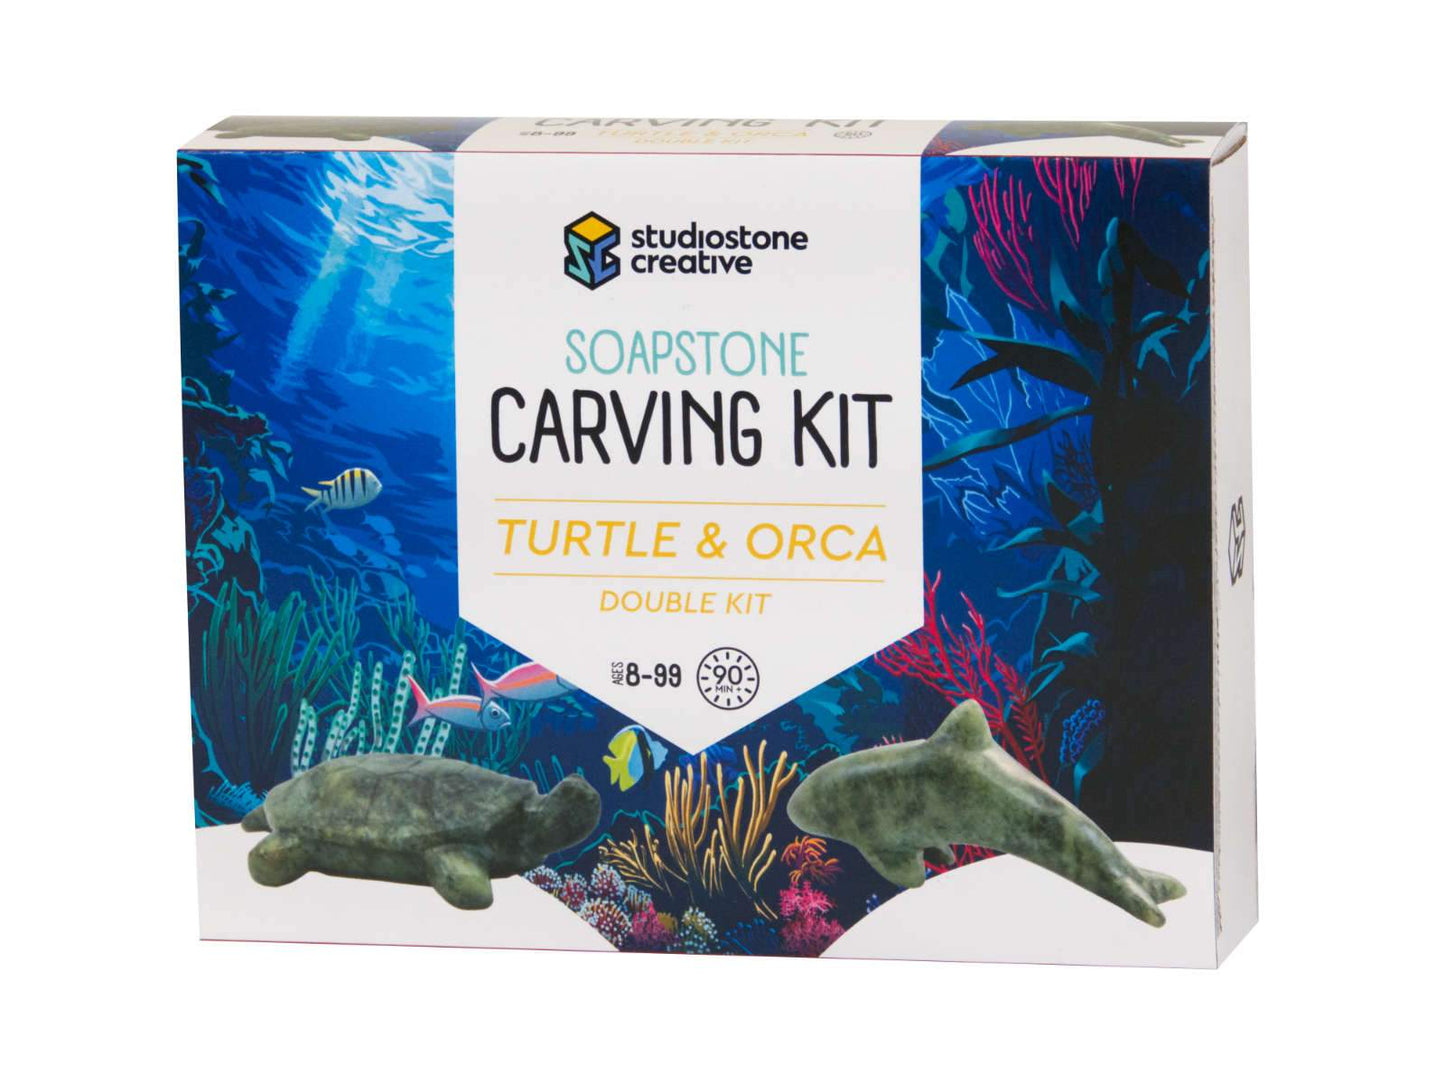 Soapstone Carving Kit Turtle & Orca